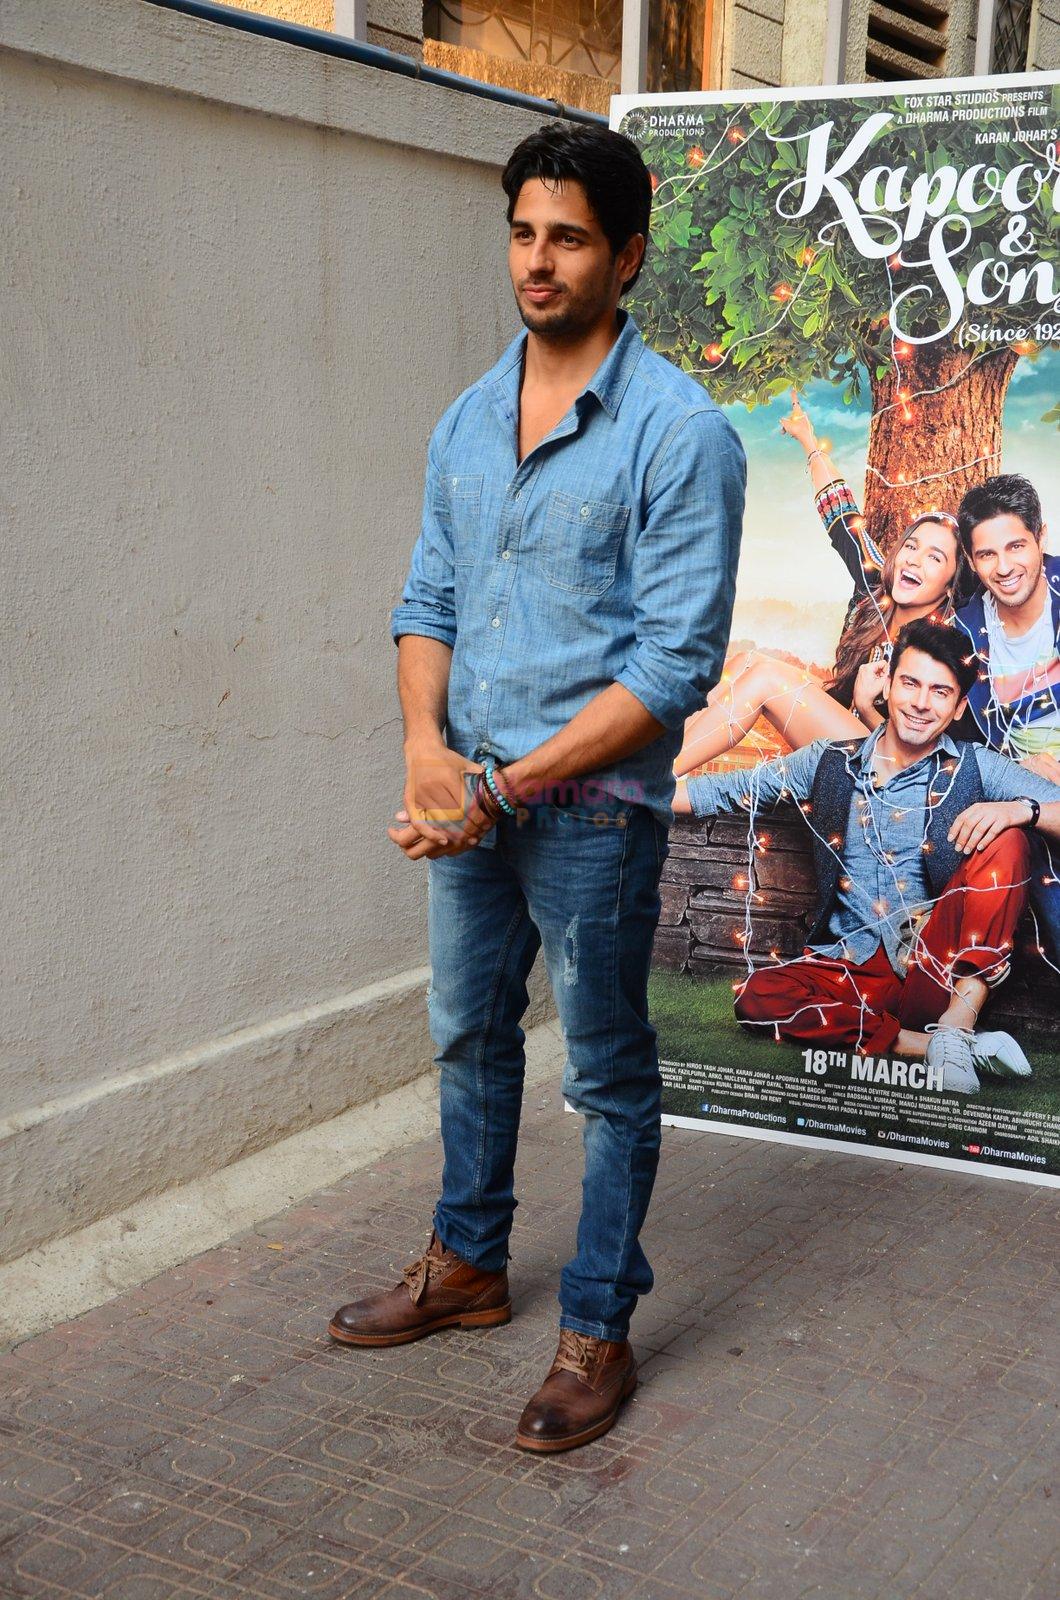 Sidharth Malhotra at Kapoor N Sons promotions at Johar's office on 3rd March 2016